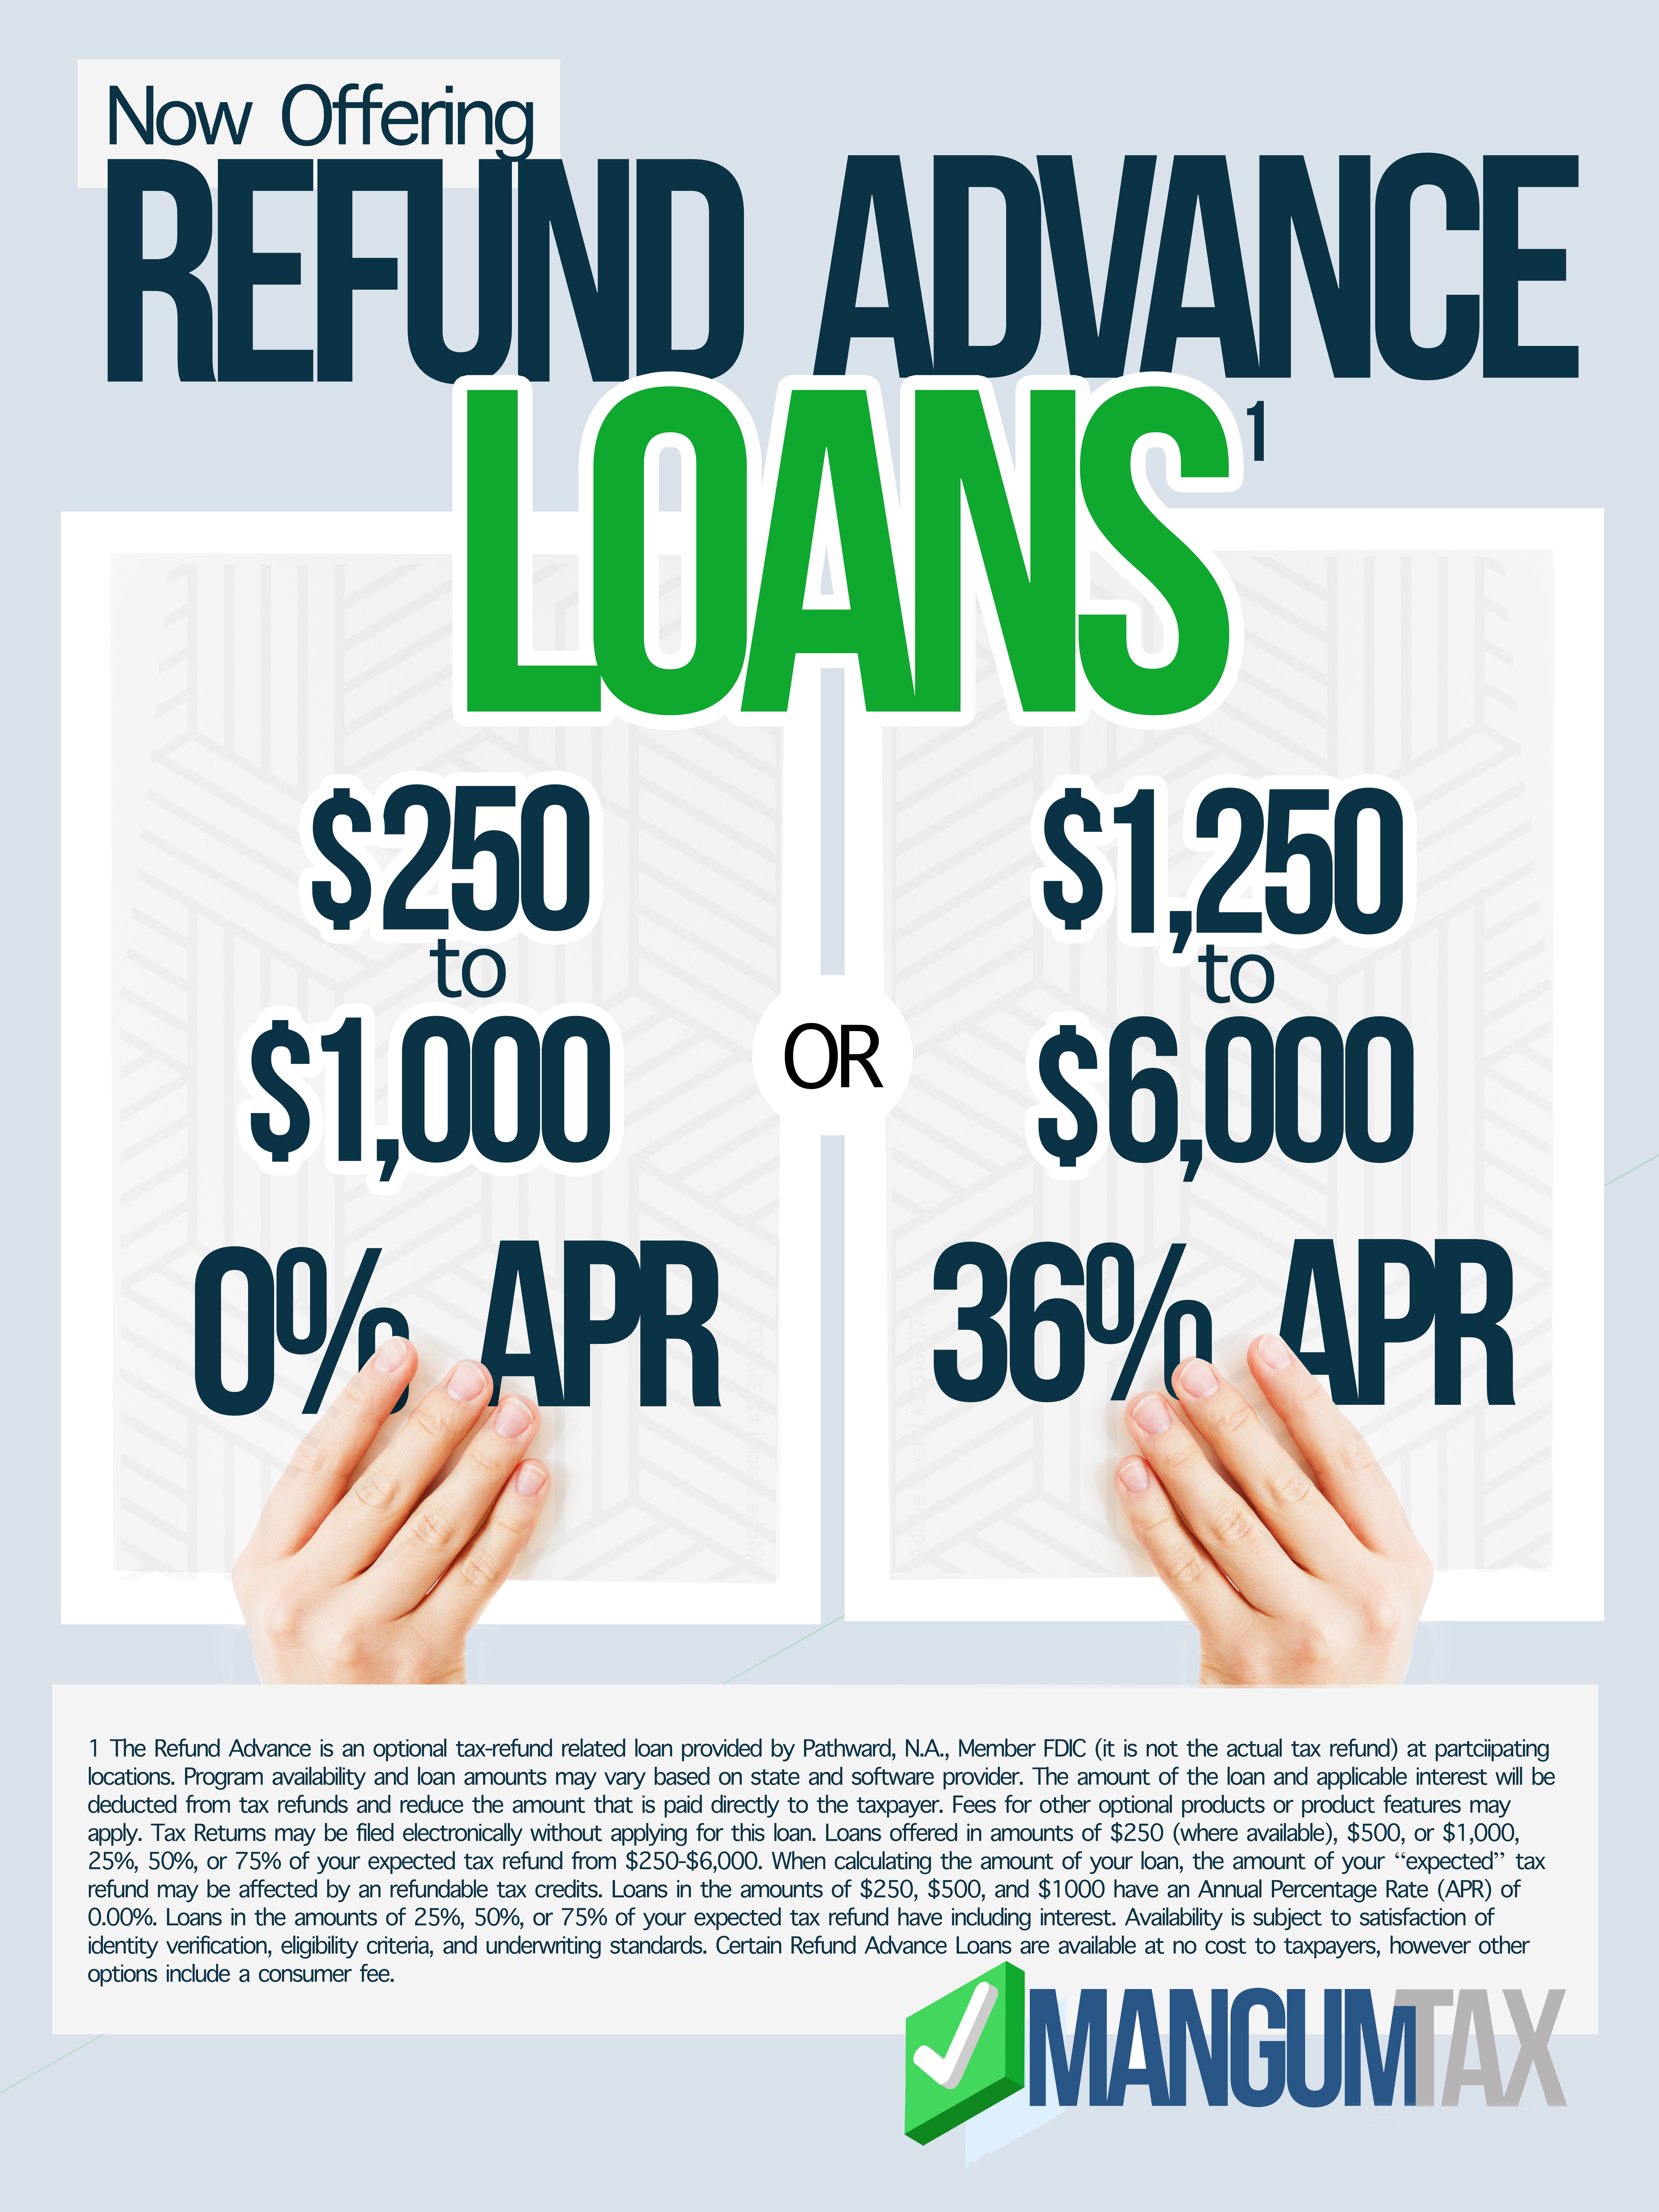 Refund-Advance-Loans-Poster